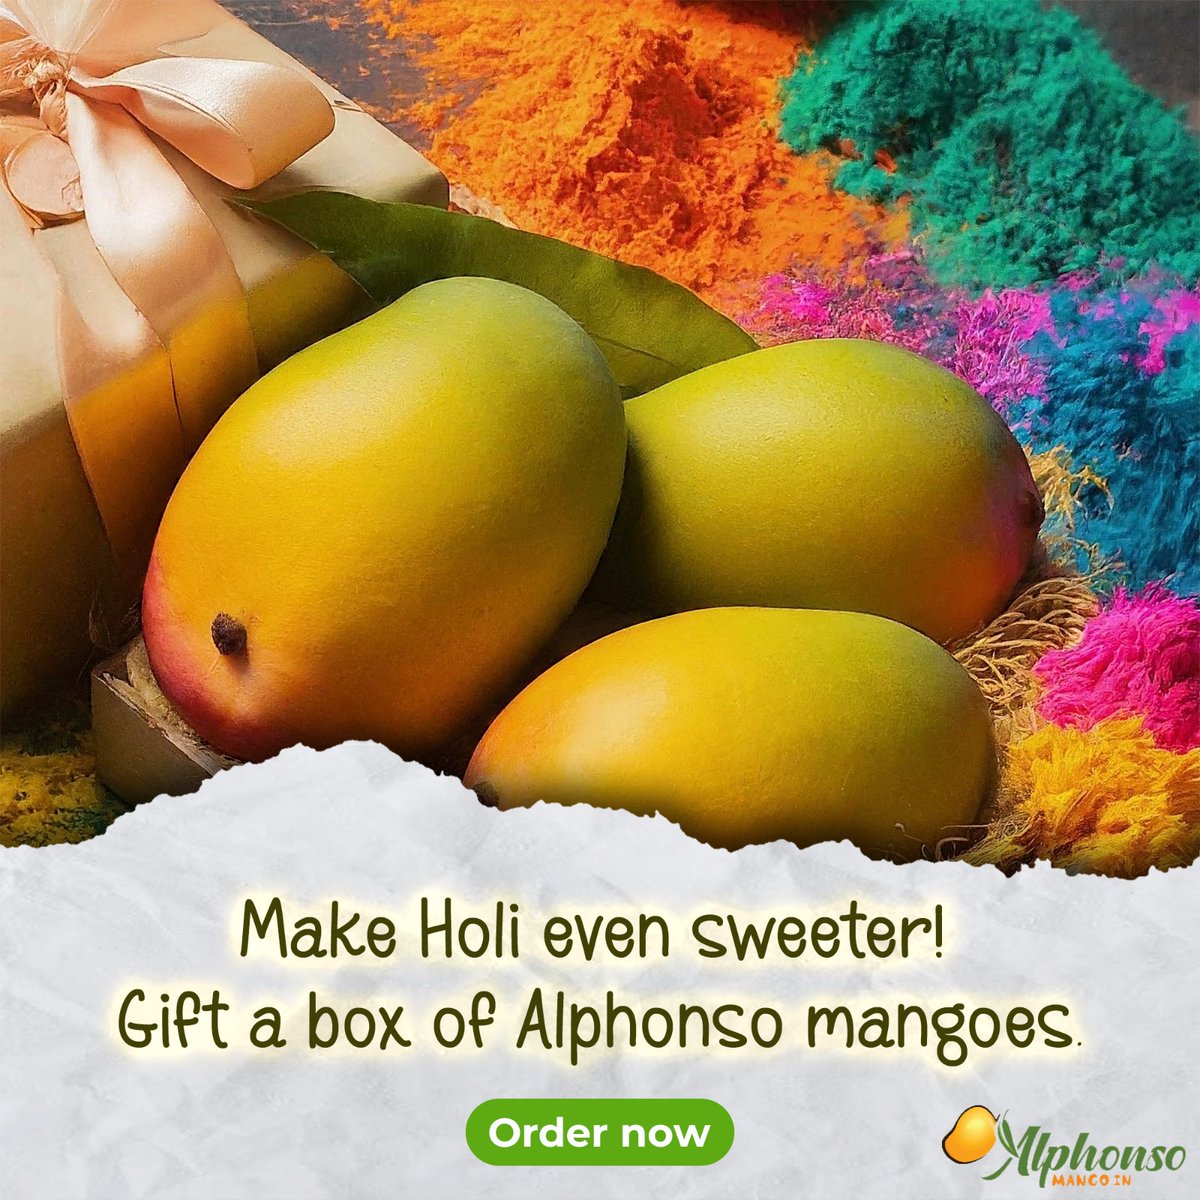 Taste of Tradition with Alphonso Mangoes

🎨 Celebrate Holi with a Burst of Ratnagiri & Devgad Sunshine of Alphonso Mangoes (Delivered Pan-India)!

Indulge in the legendary sweetness of authentic Alphonso mangoes, handpicked from the orchards of Ratnagiri and Devgad. Experience